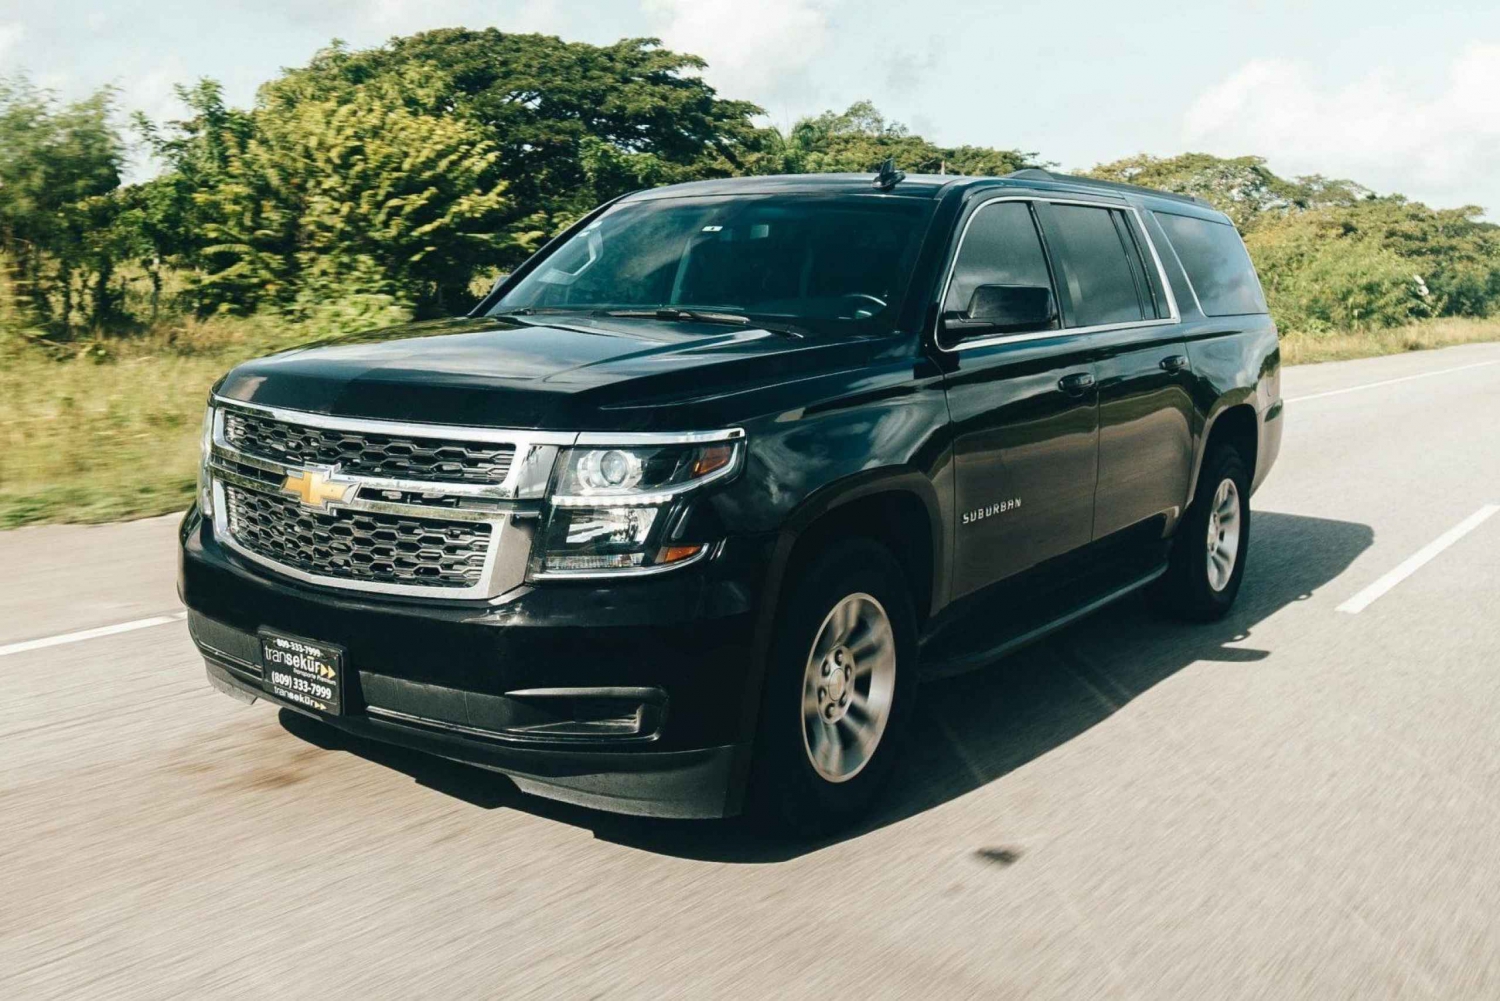 Royal service transfer from punta cana airport